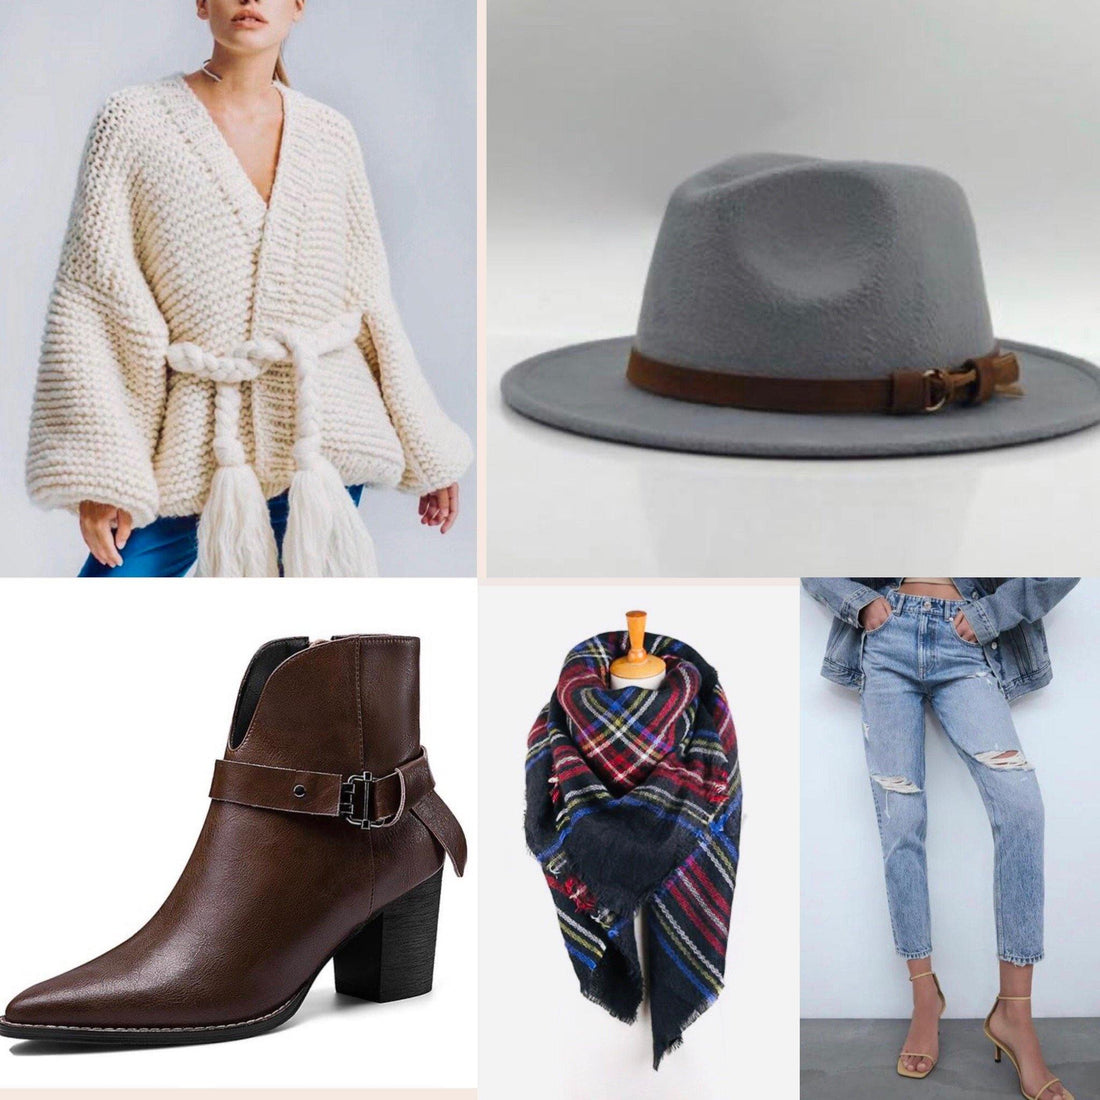 What We Want vs What We Need for Fall - Blonder Mercantile